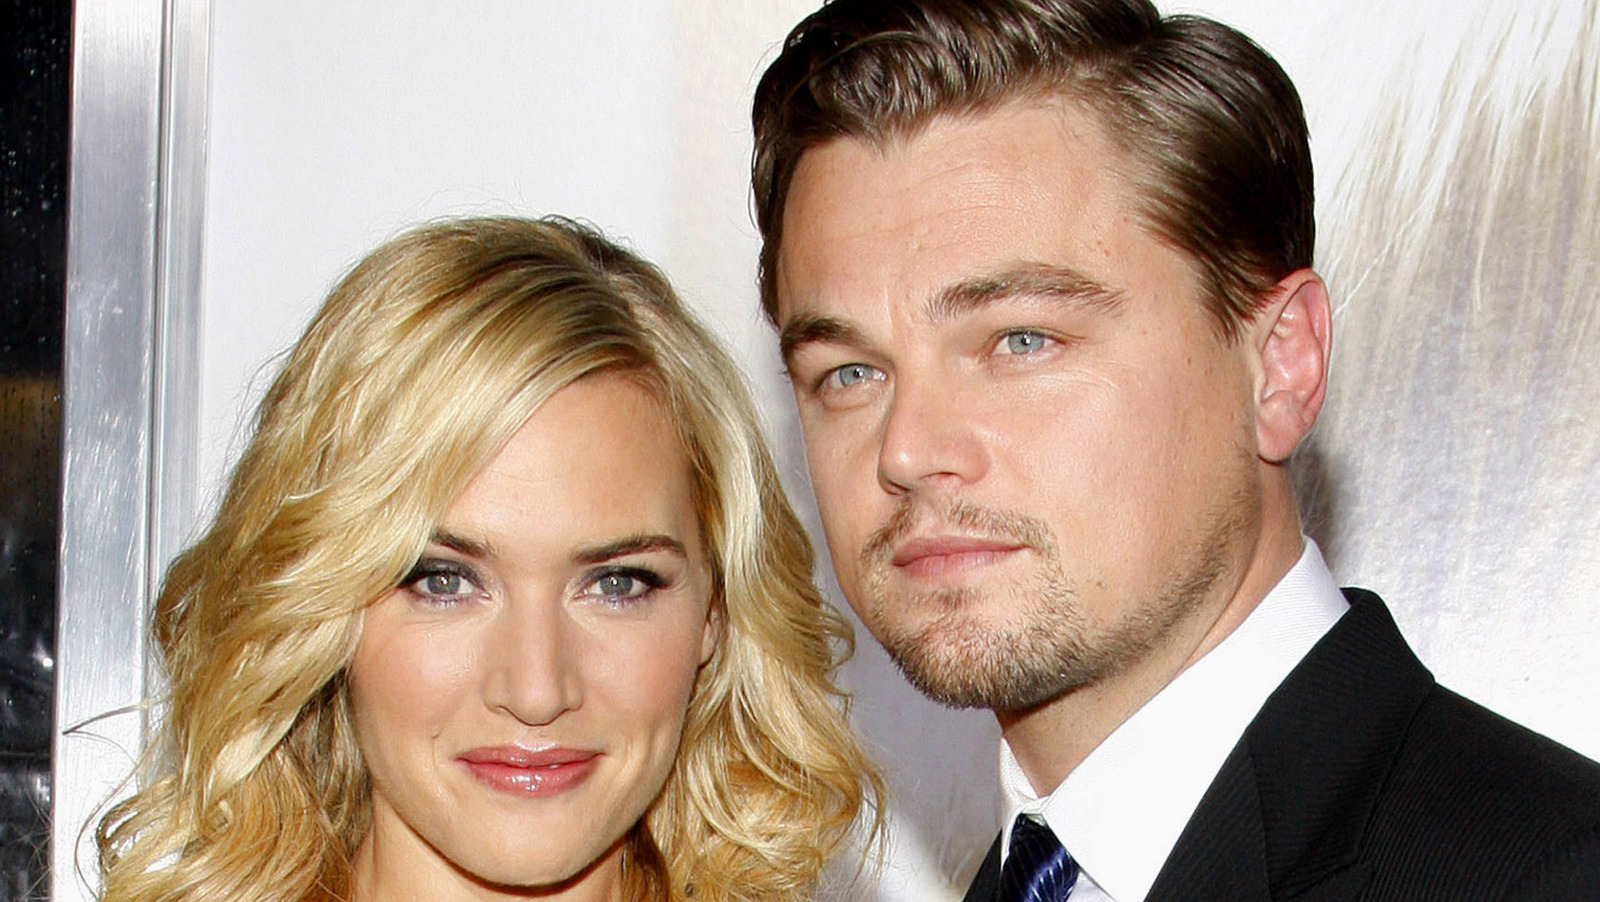 Here's What We About Kate Winslet And Leonardo DiCaprio's Relationship